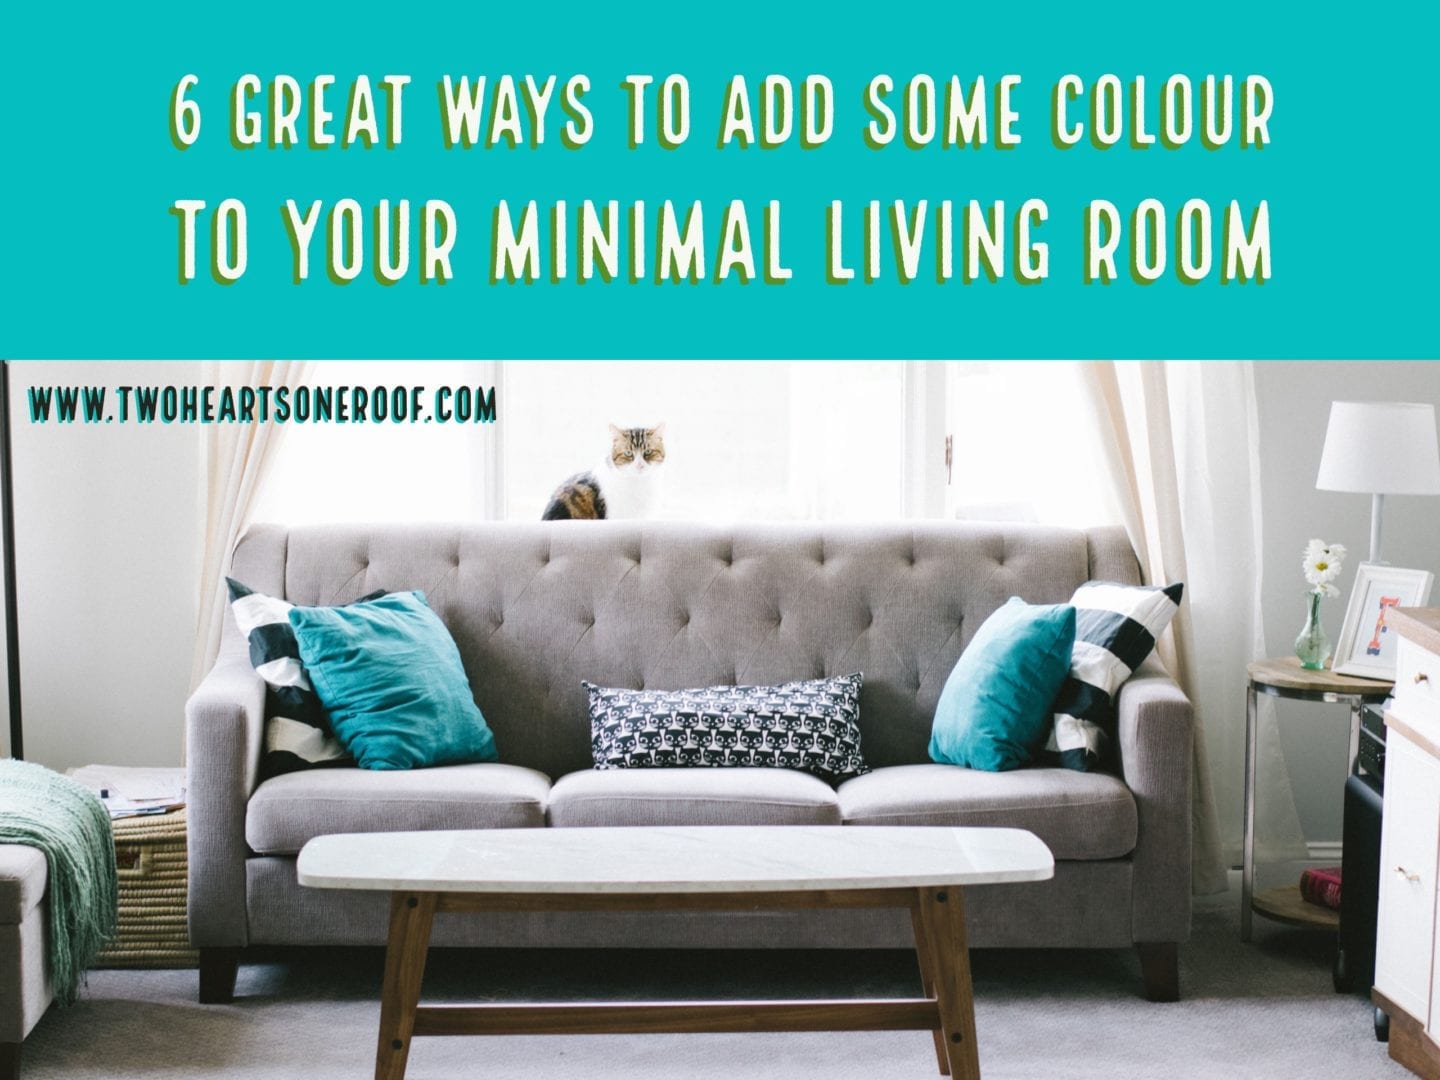 6 Great Ways To Add Some Colour to Your Minimal Living Room